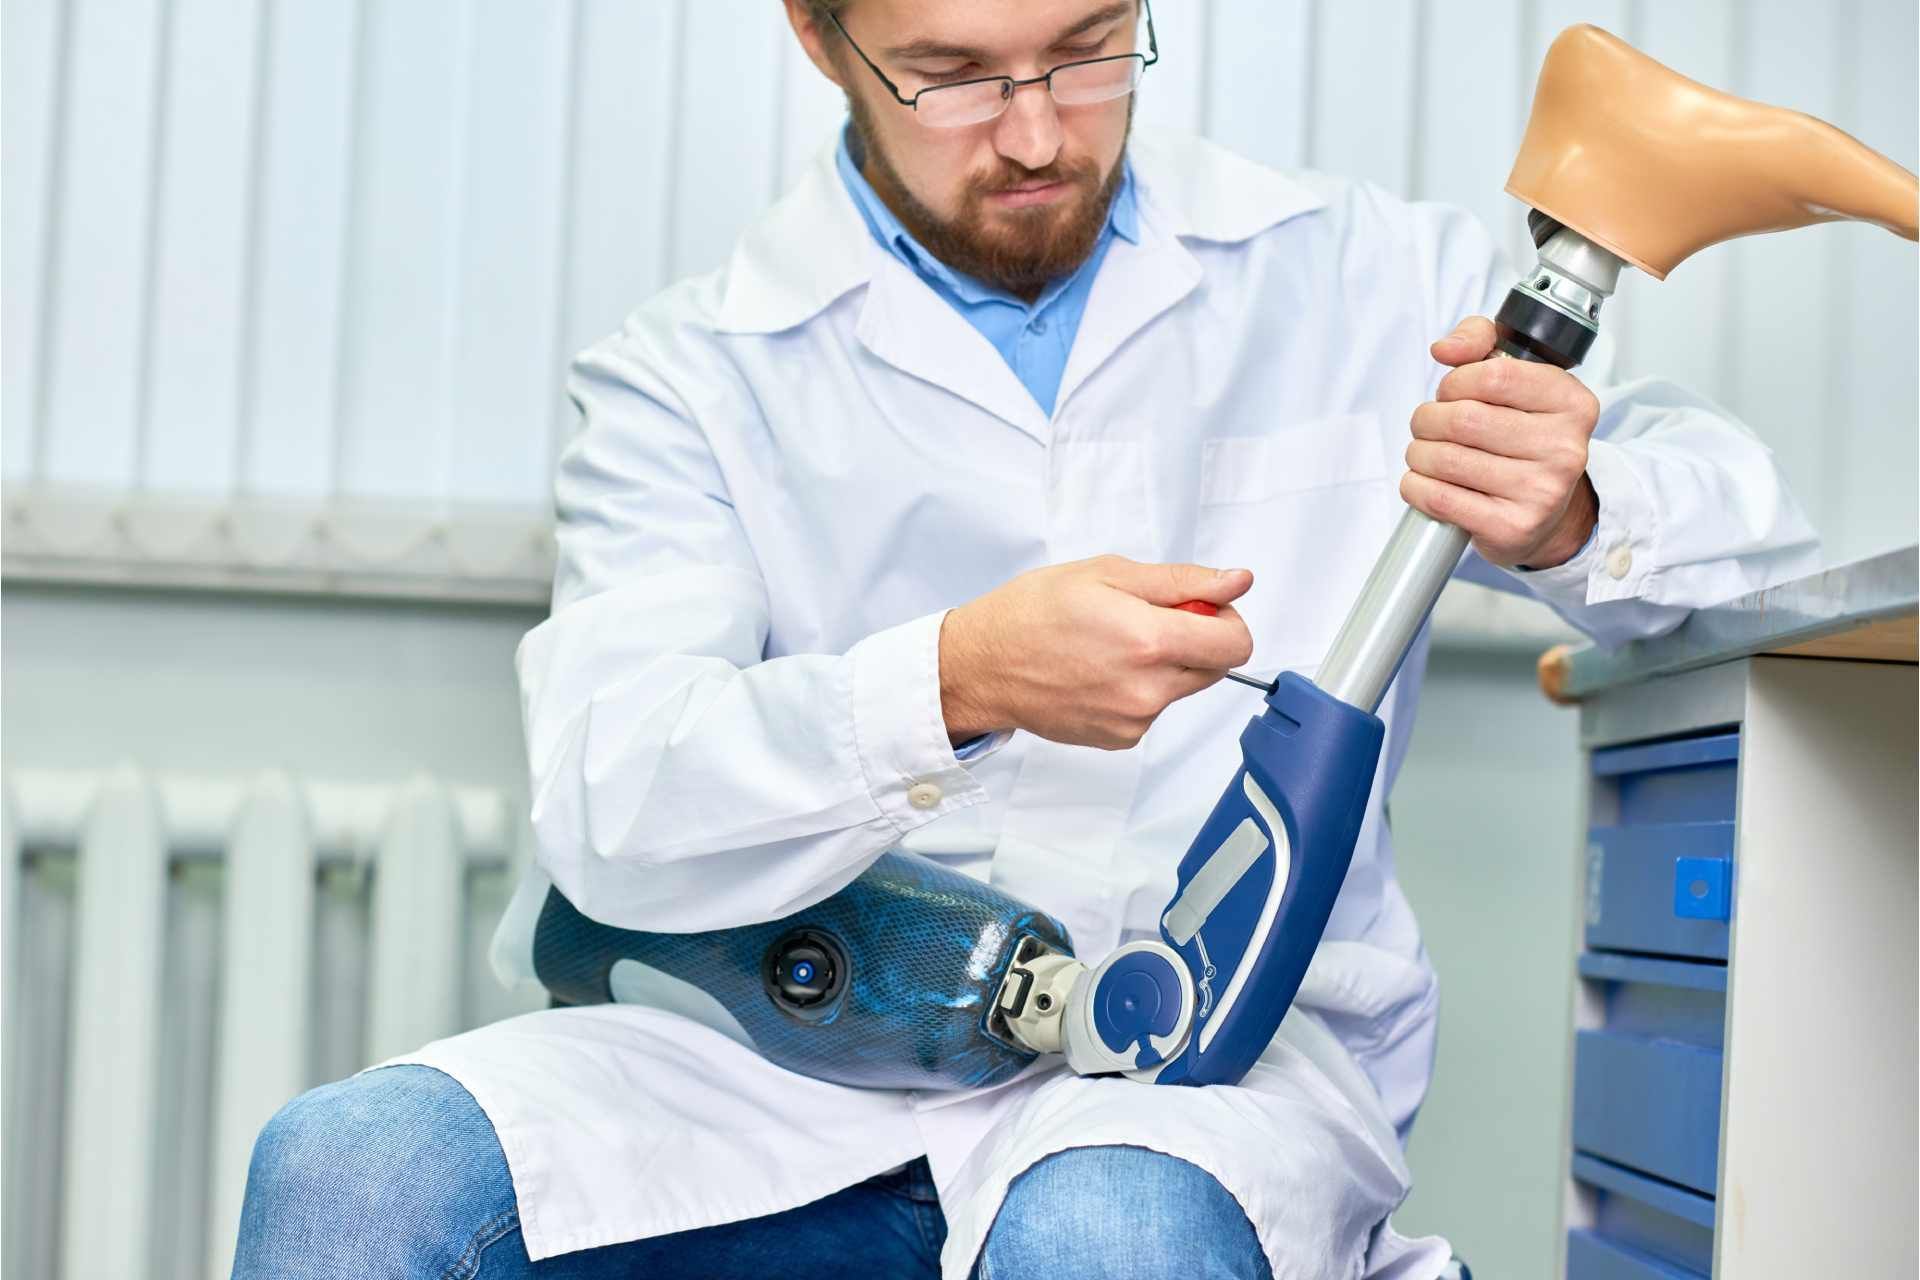 A person caring for a Prosthetic at Kenney Orthopedics Prosthetic Services near Lexington, Kentucky (KY)